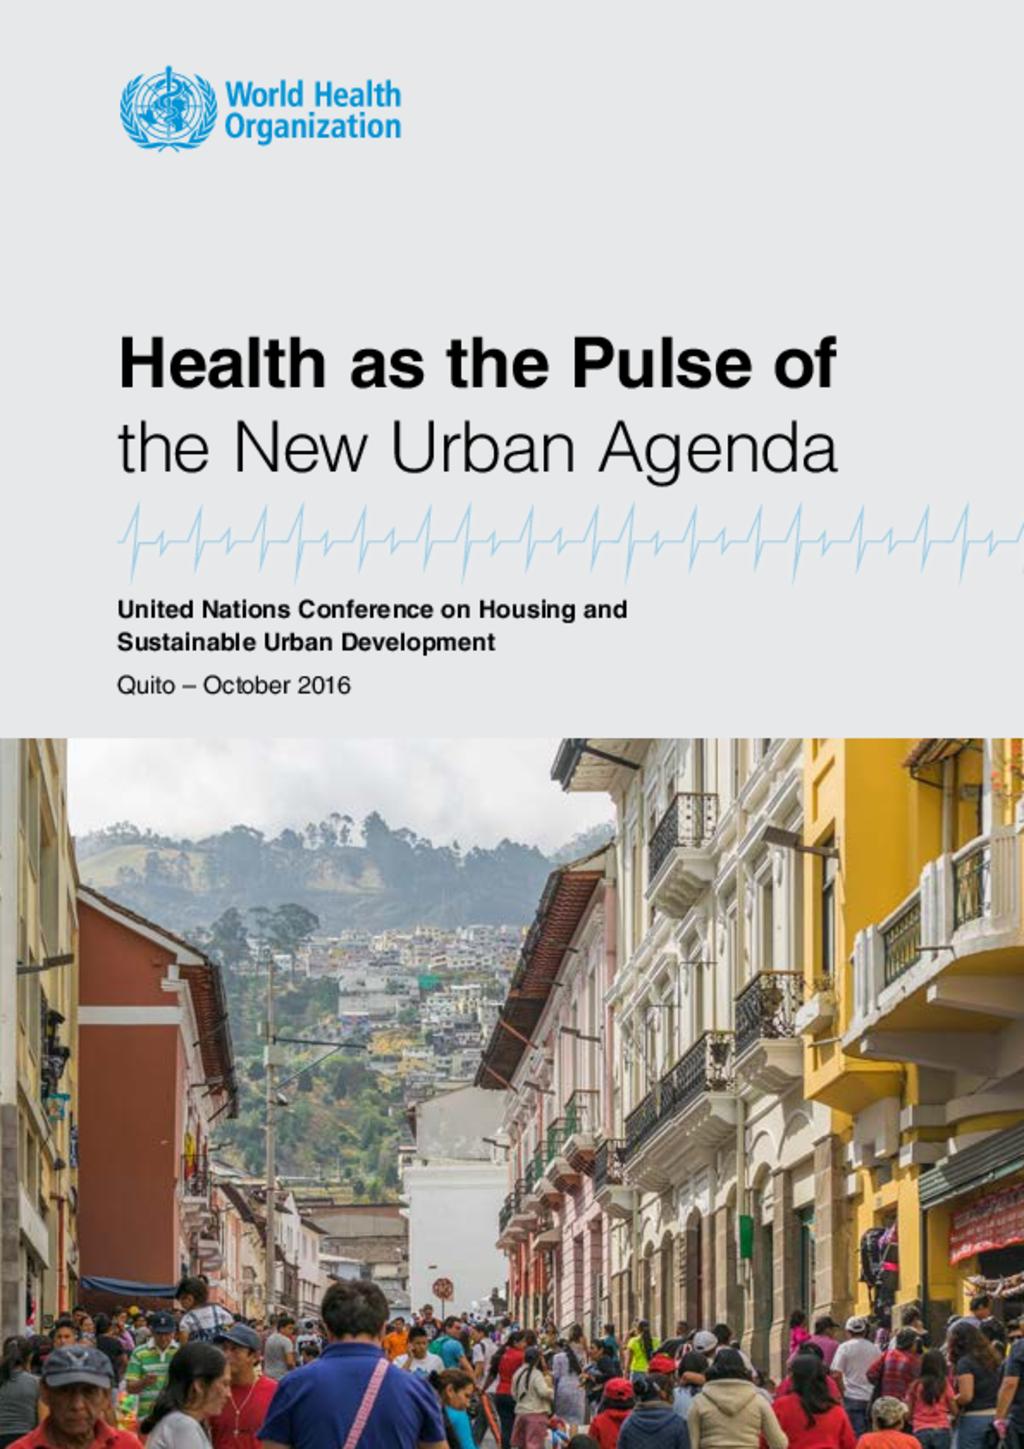 Health as the Pulse of the New Urban Agenda